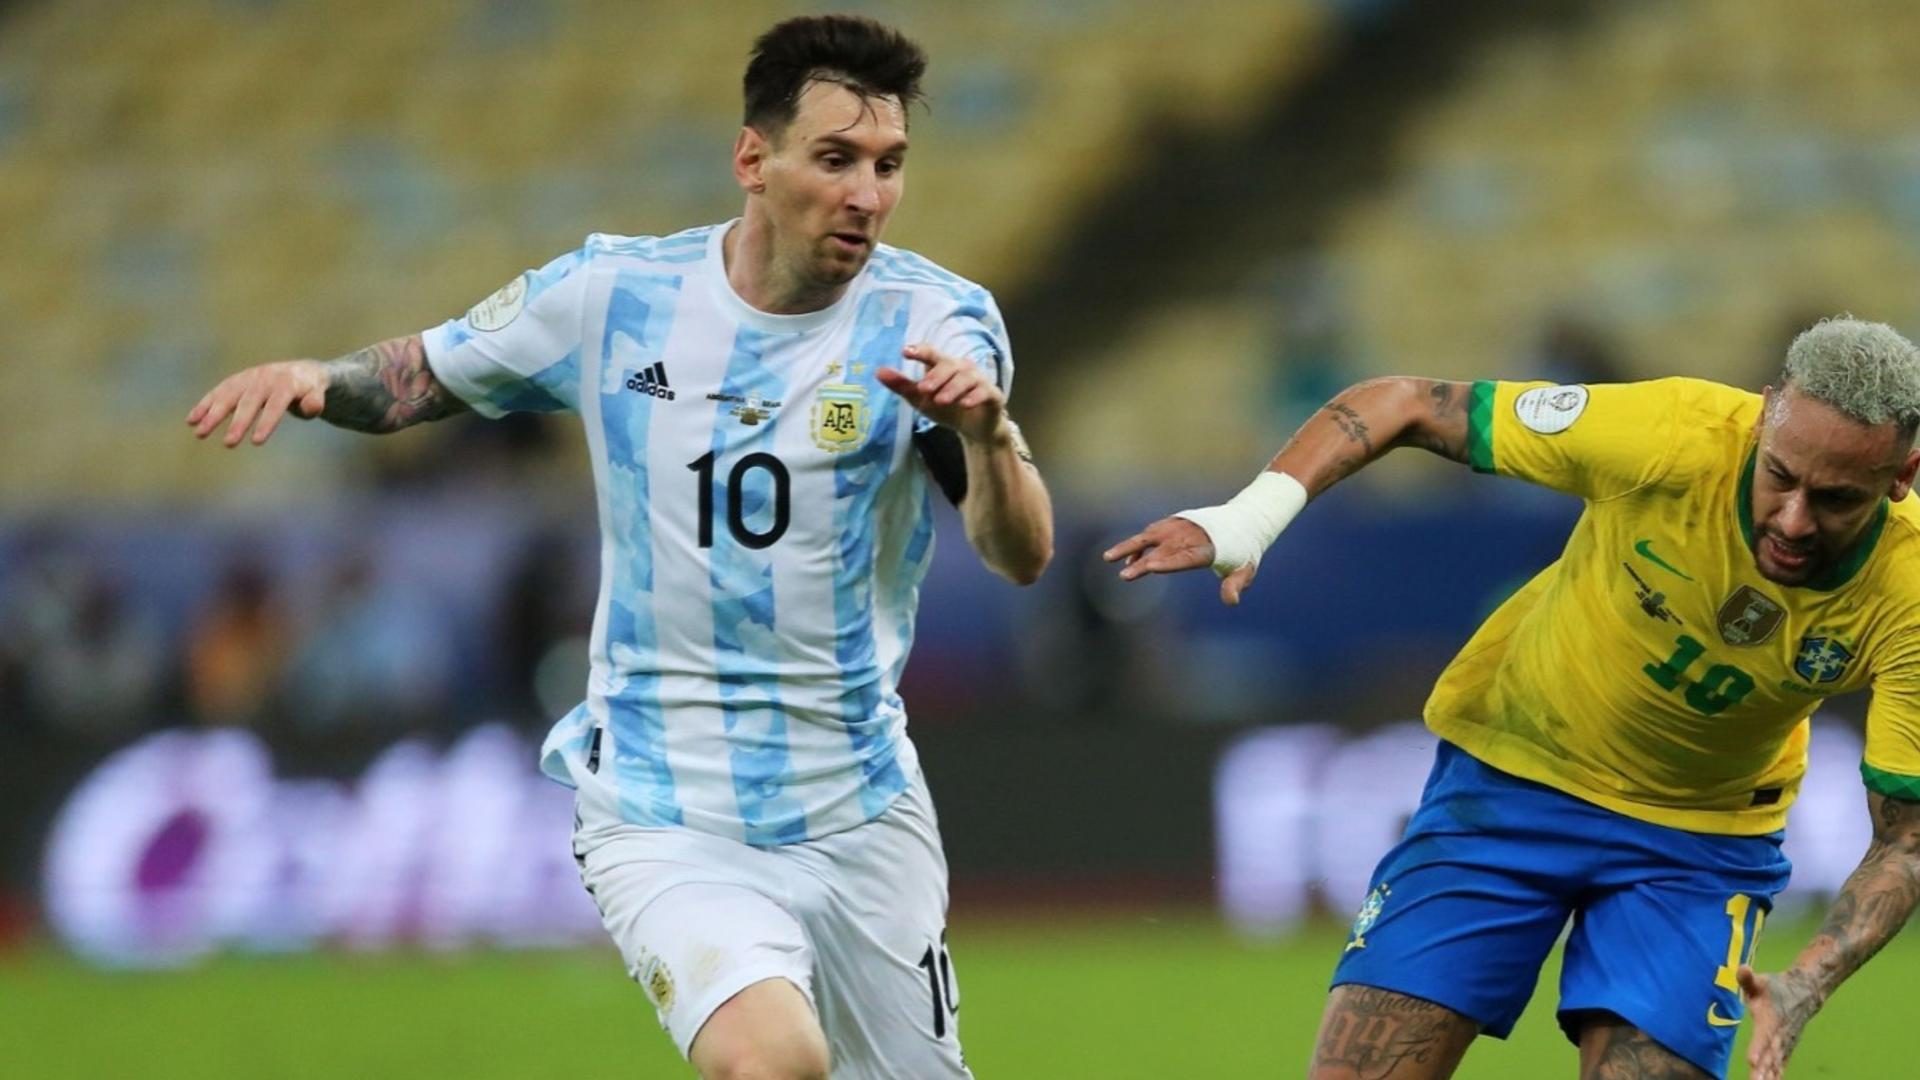 Brazil vs Argentina: Know head-to-head record and other key stats